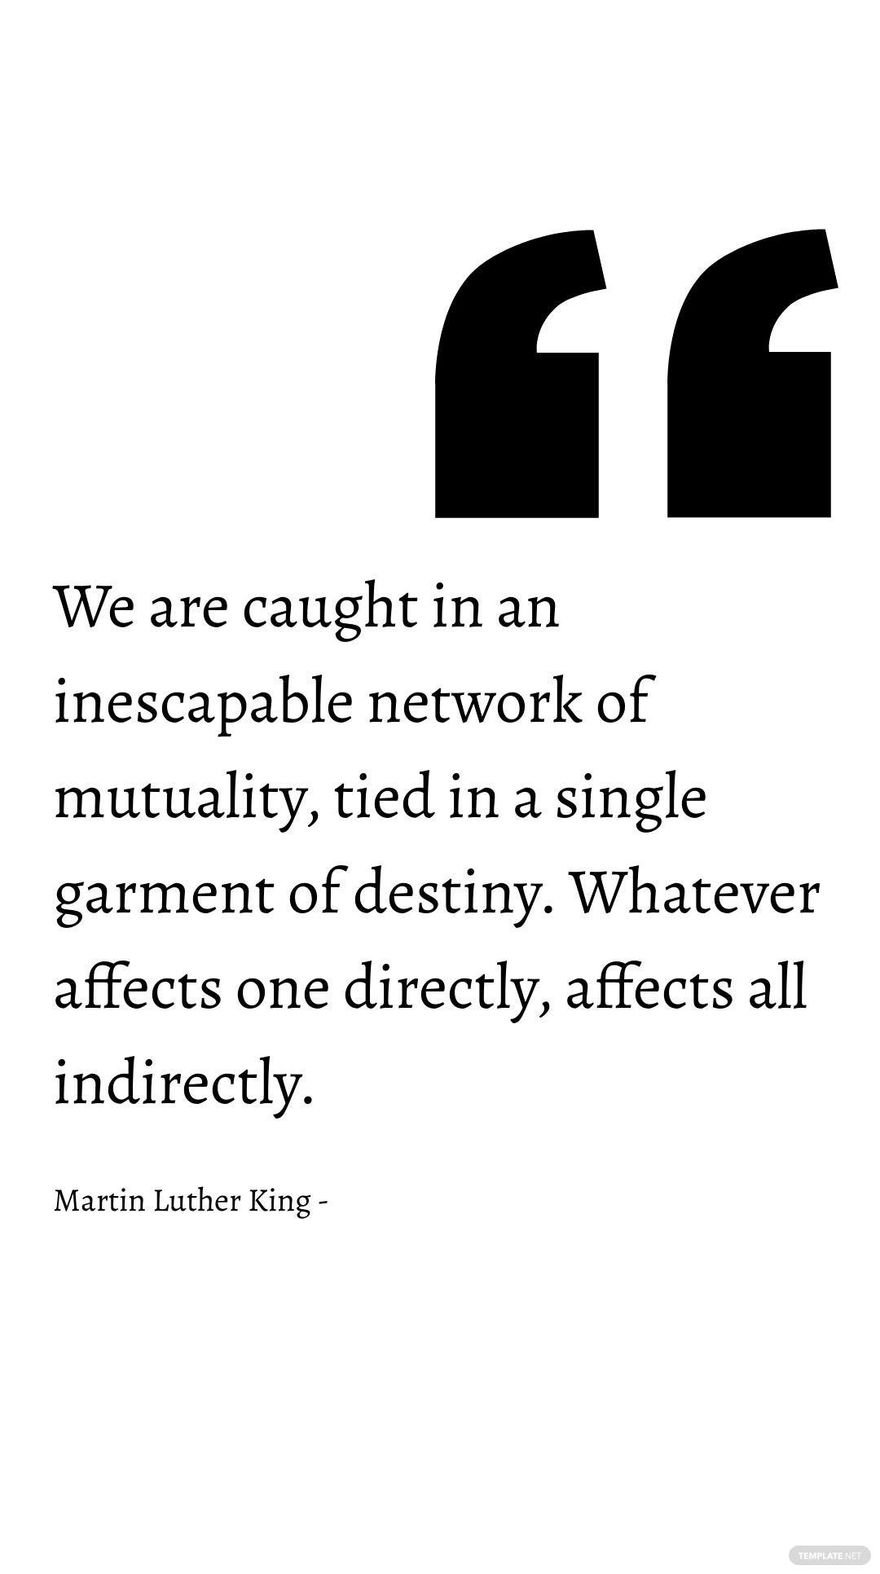 Free Martin Luther King - We are caught in an inescapable network of mutuality, tied in a single garment of destiny. Whatever affects one directly, affects all indirectly. in JPG